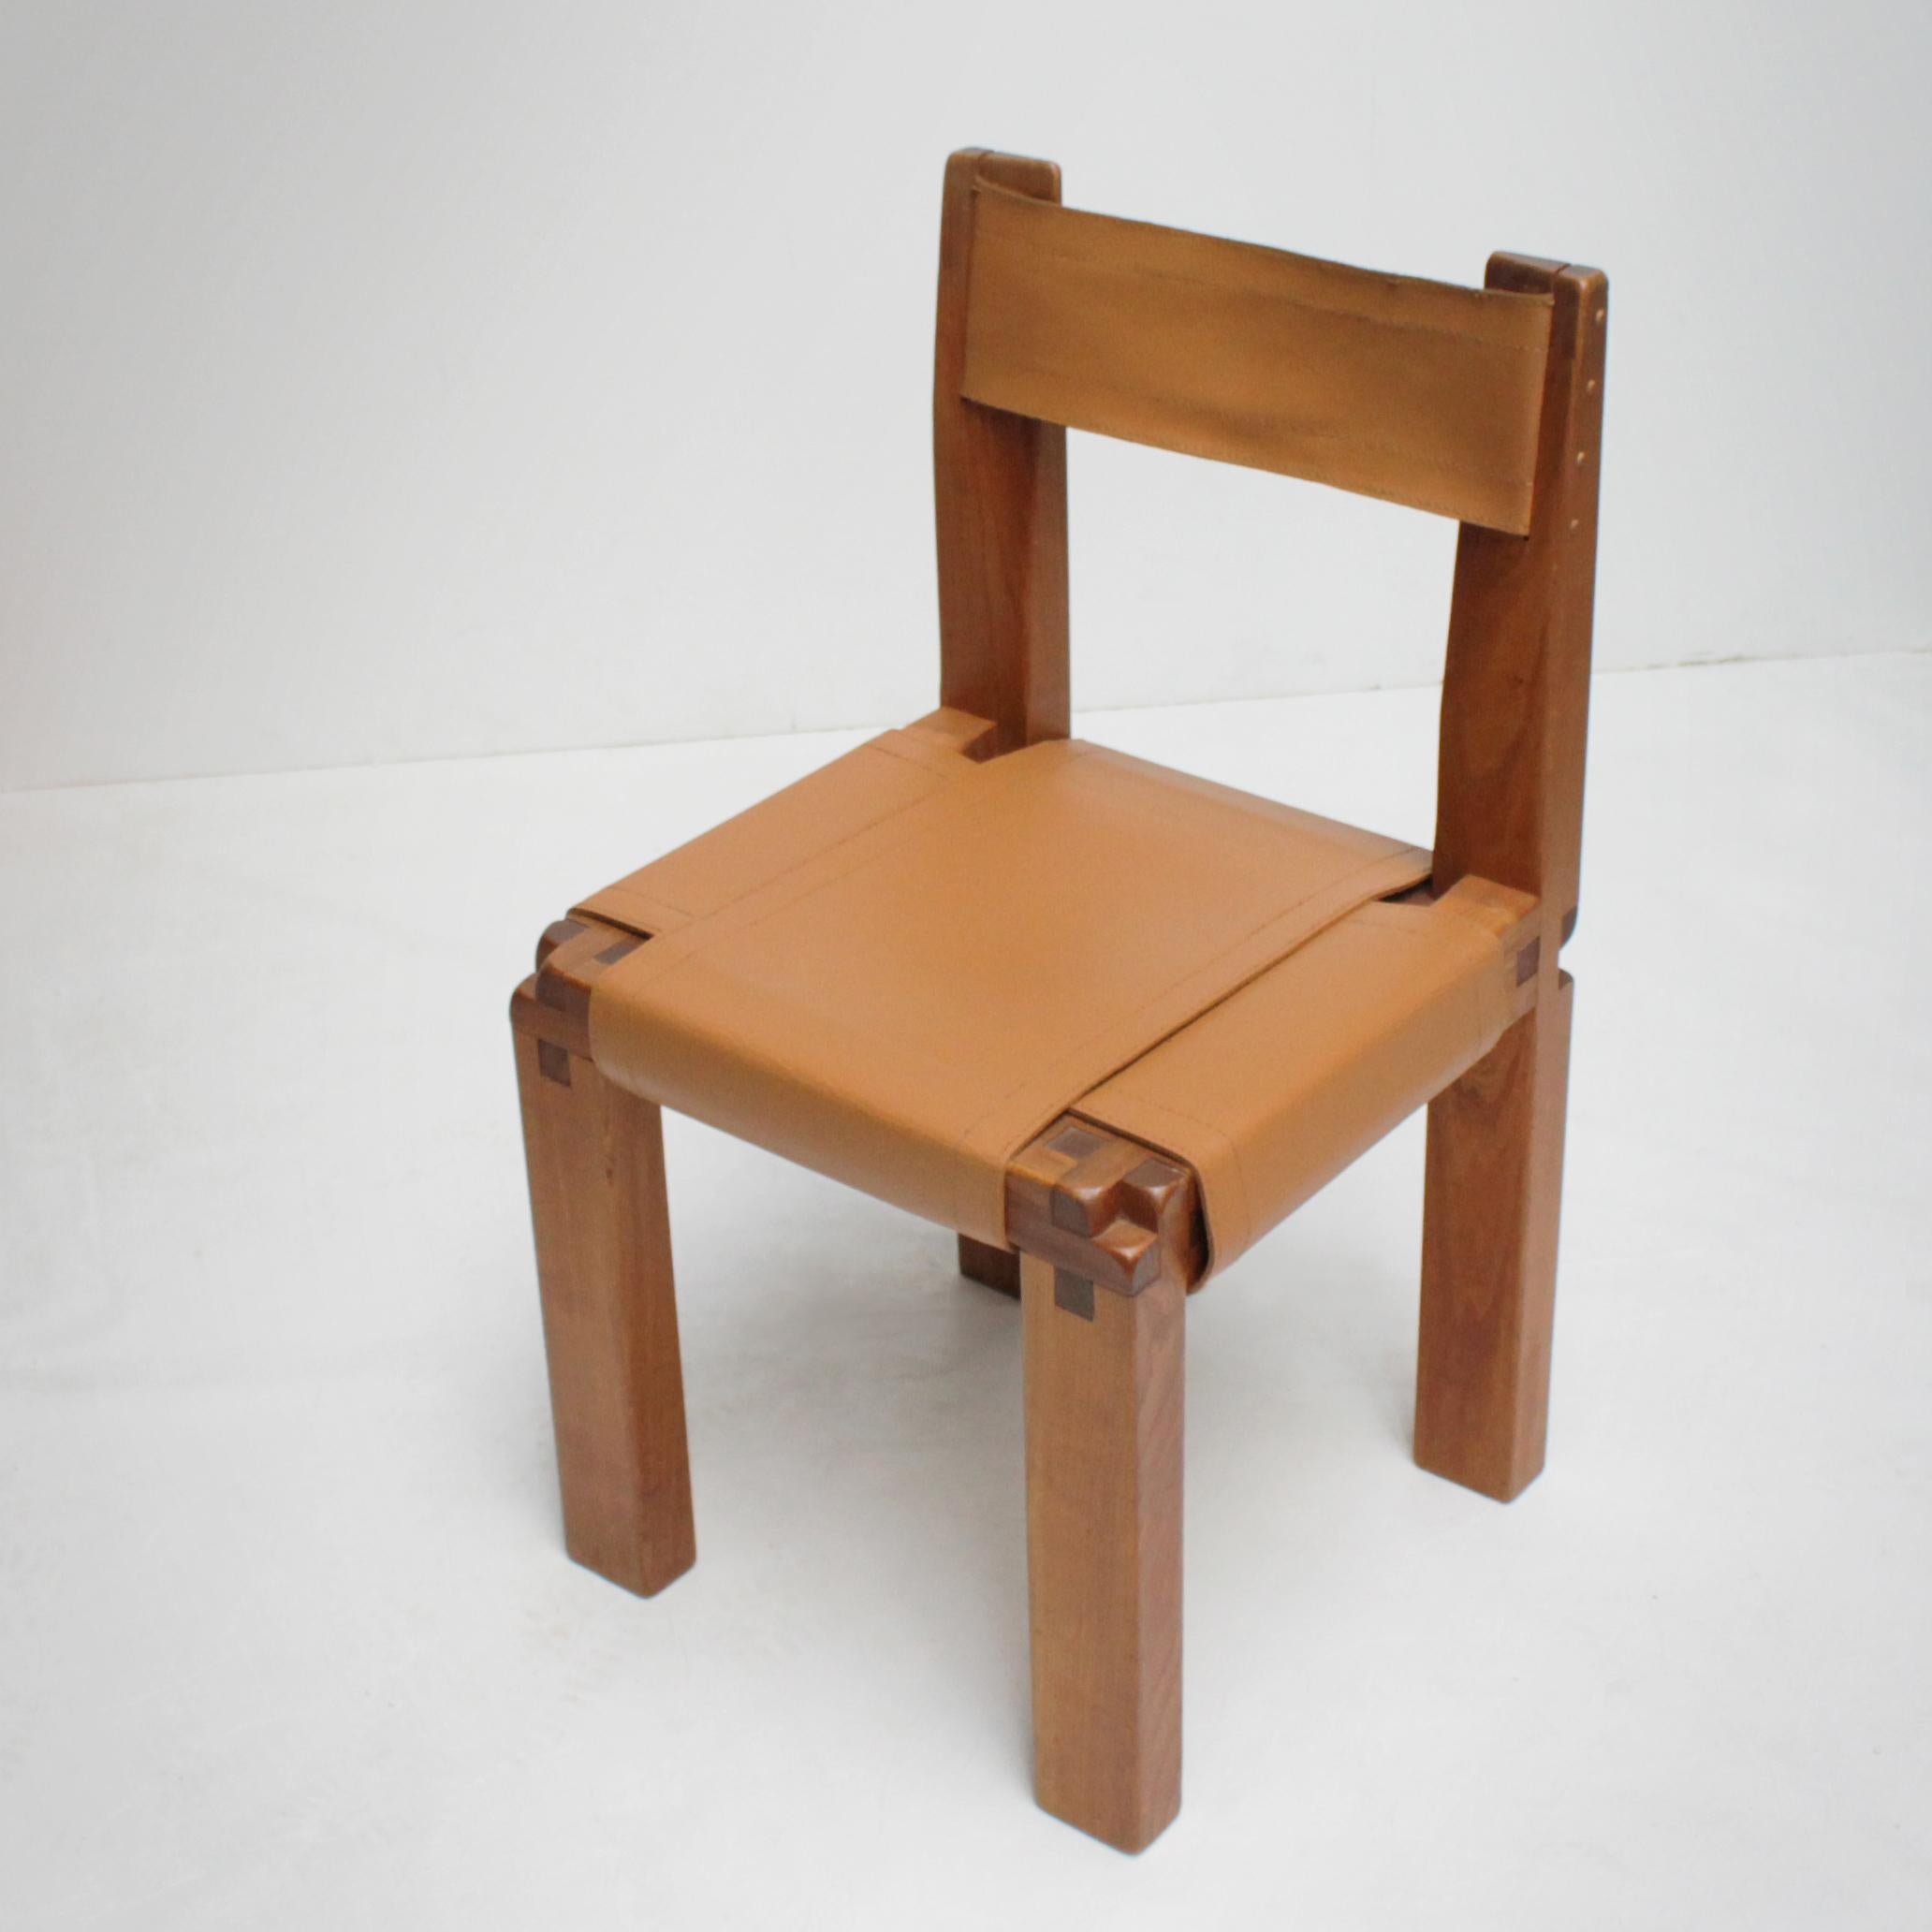 Iconic S11 chair by the French designer Pierre Chapo (1927-1987) for Atelier Chapo, Paris. Solid elm wood with beautiful wood joints. Seat and back in professionally painted saddle leather. Beautiful condition.
Dimensions: Height 30.7 in. (78 cm),